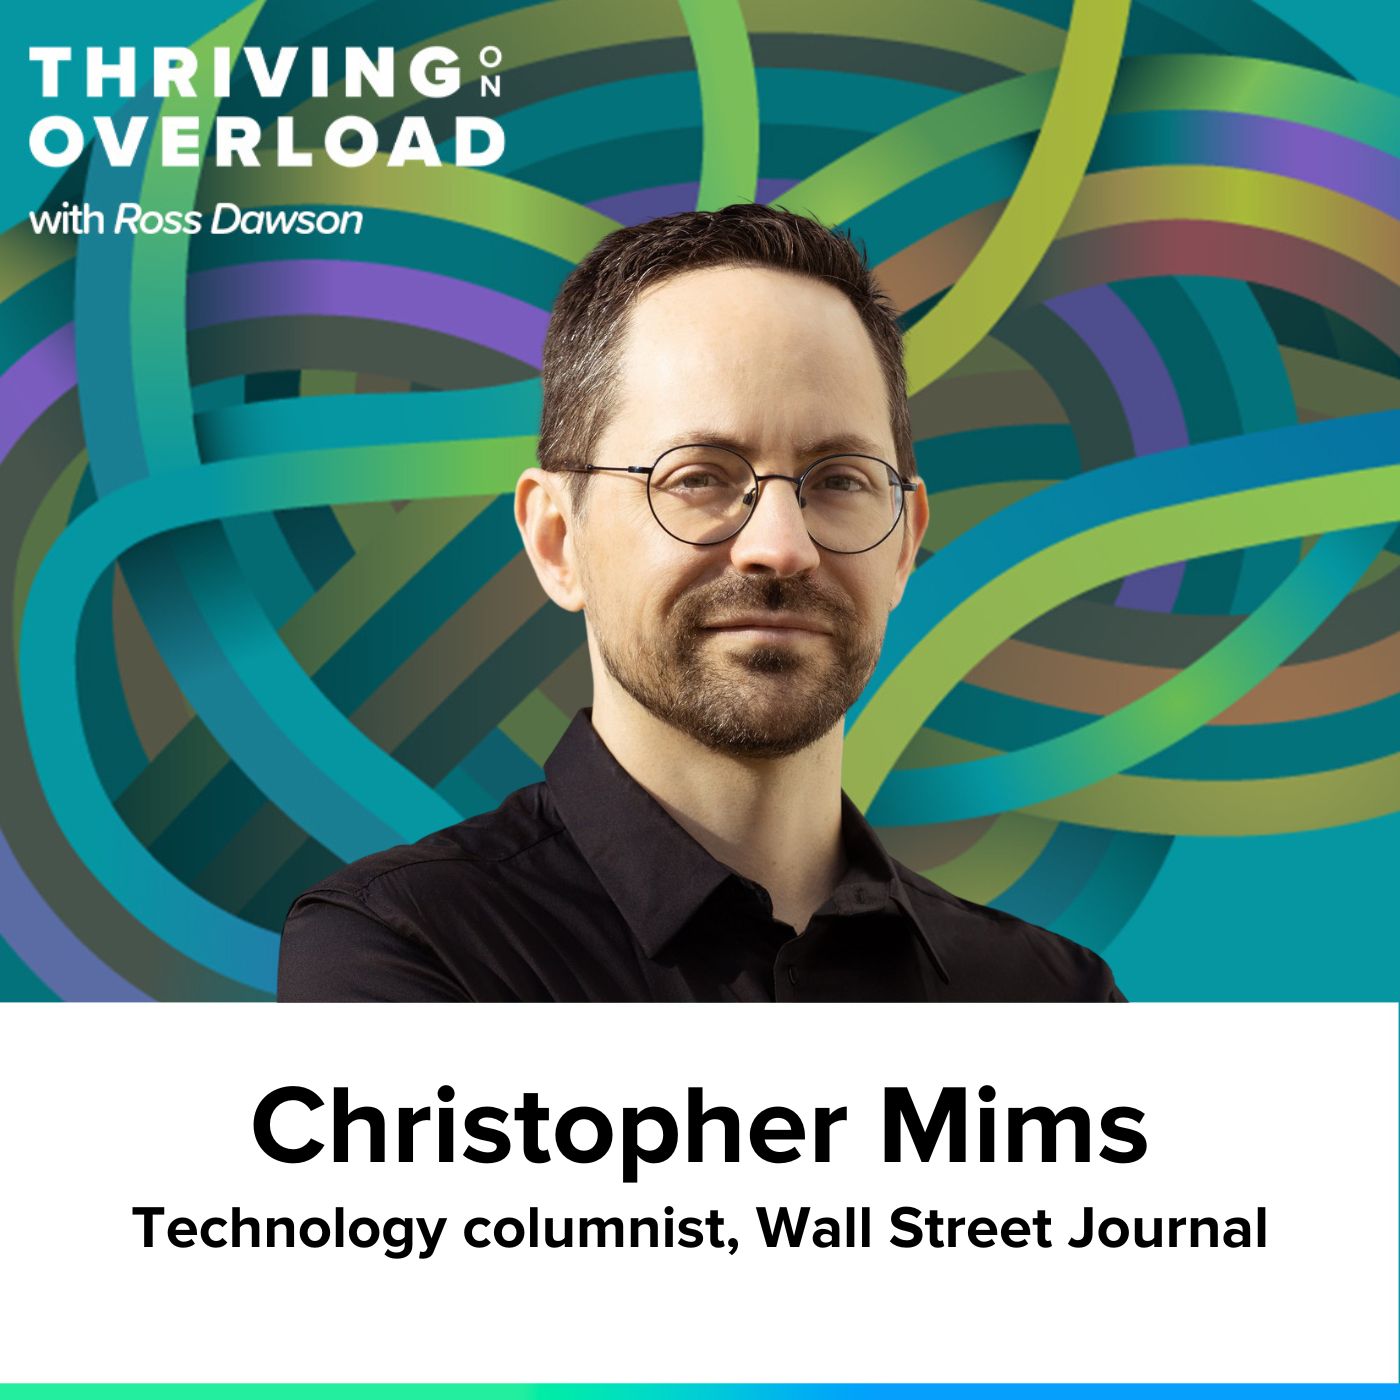 Christopher Mims on seeing what’s next, filtering tools, valuable